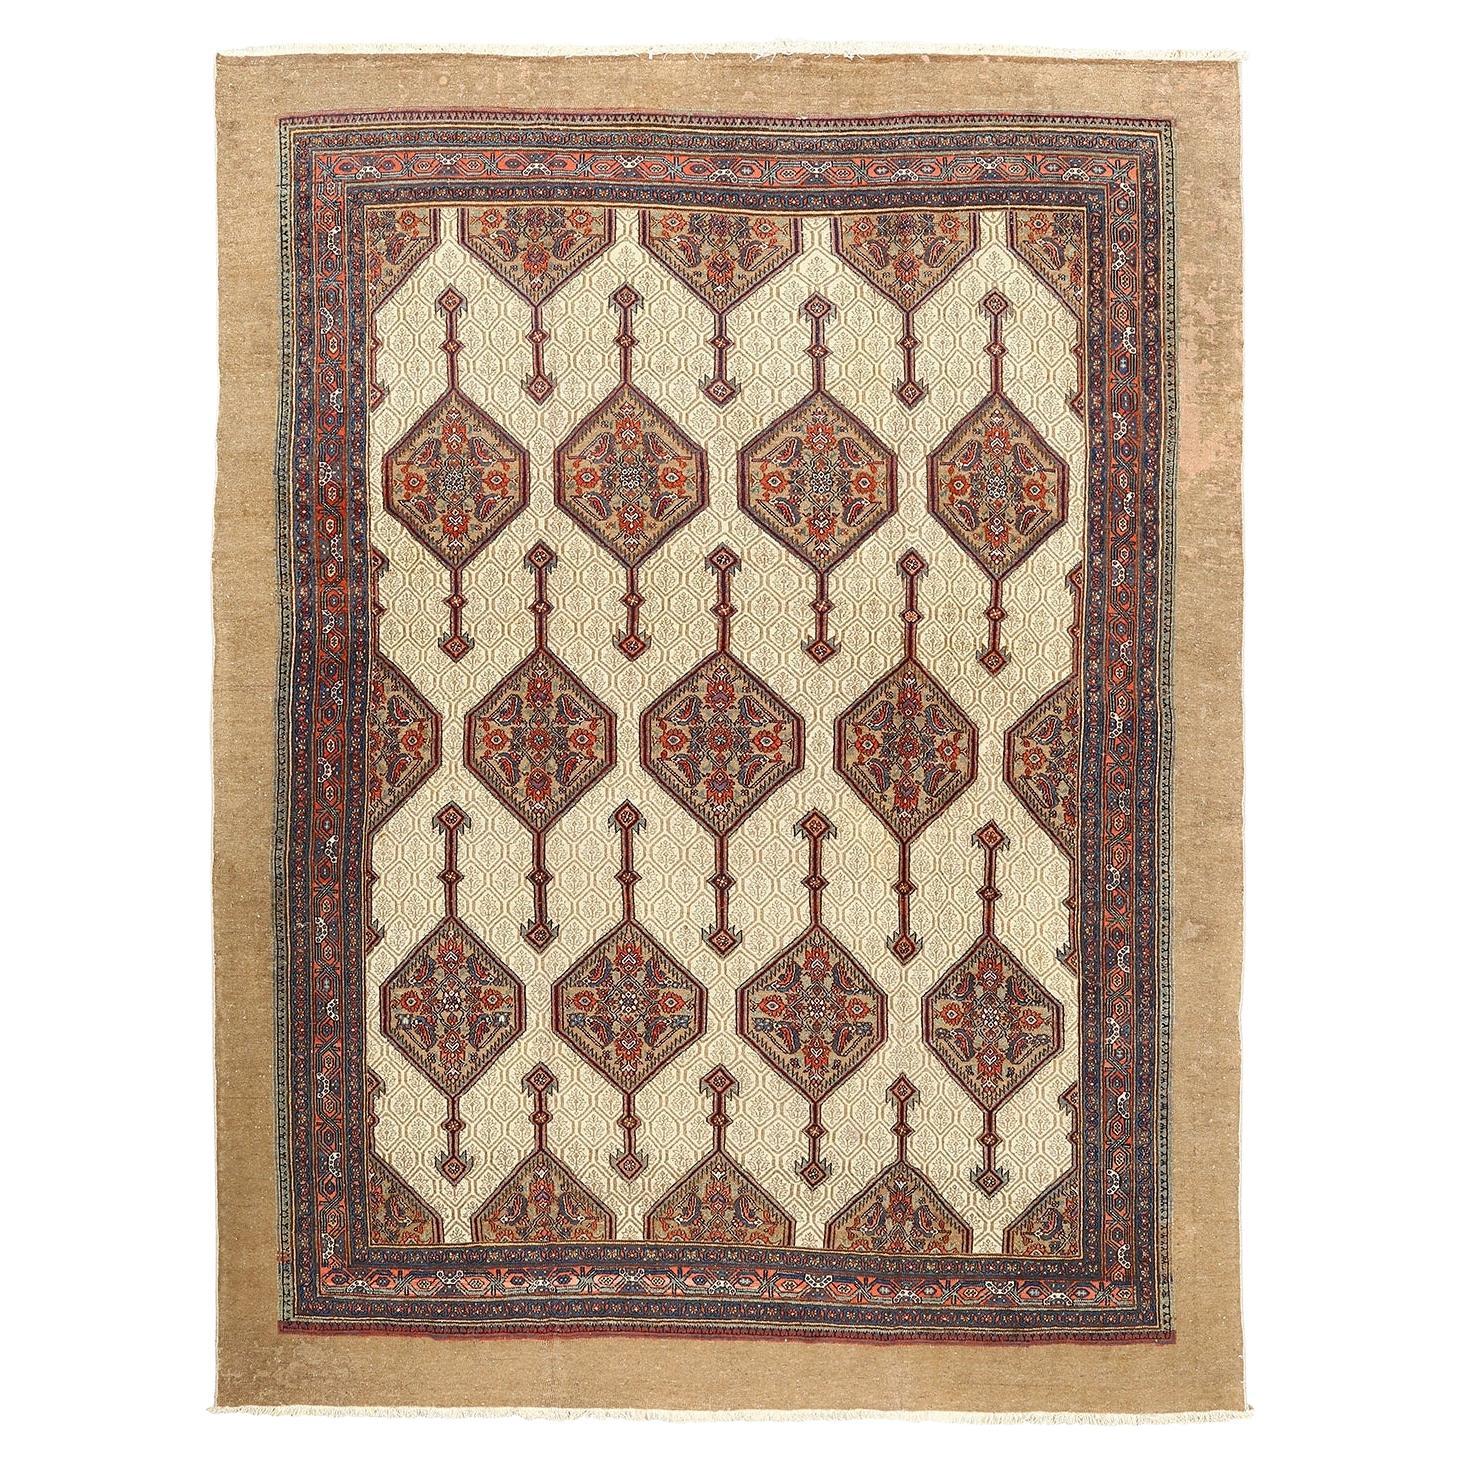 Damoka Collection Antique Persian Sarab - Size: 12 ft 4 in x 9 ft 4 in